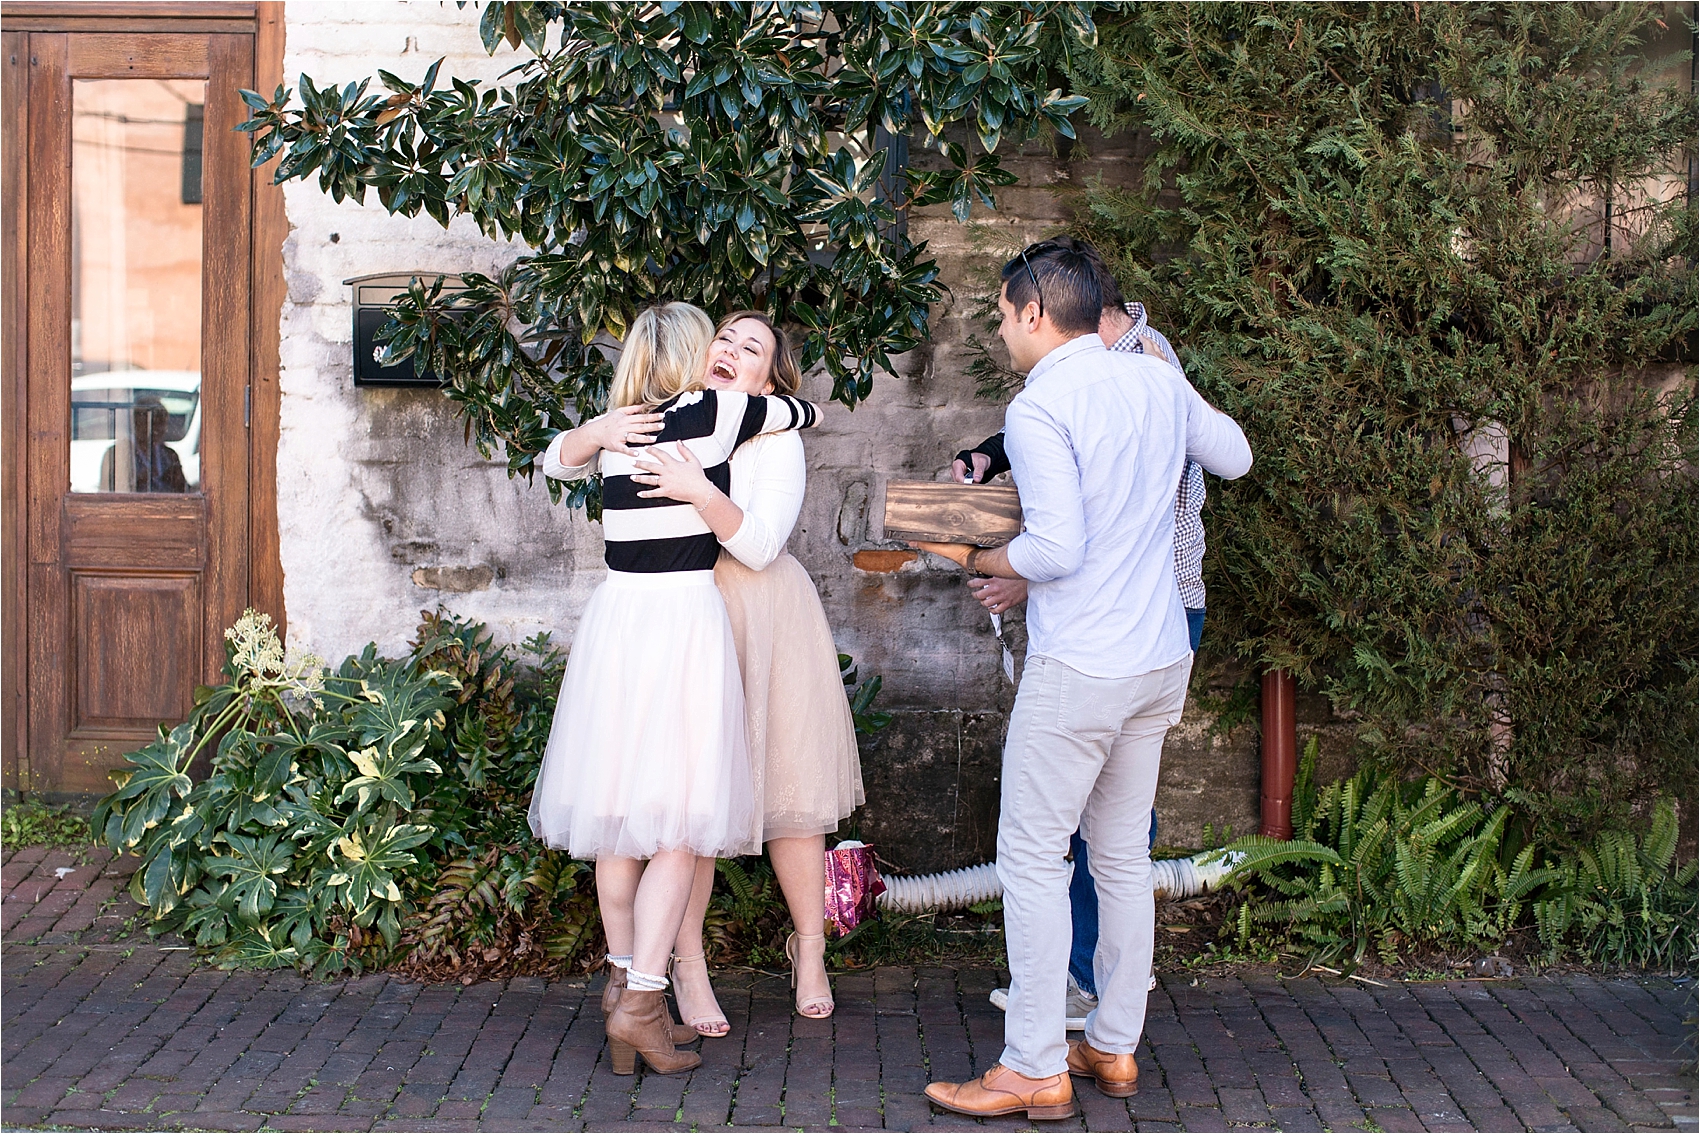 View More: http://laurahernandezphotography.pass.us/amy-jordan-will-you-be-our-photographers